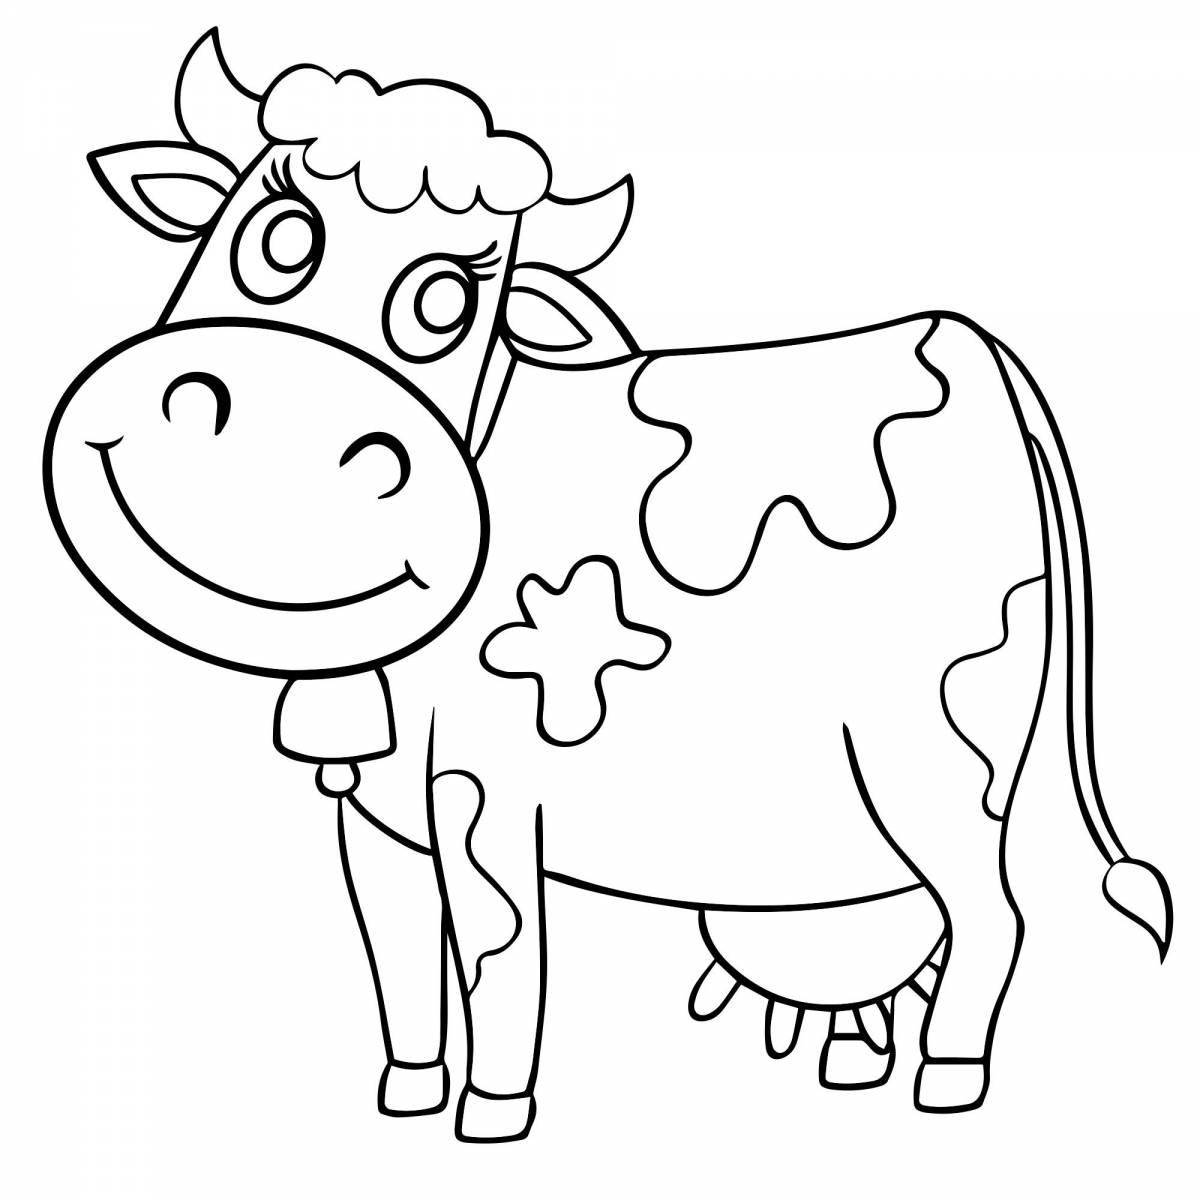 Playful cute cow coloring book